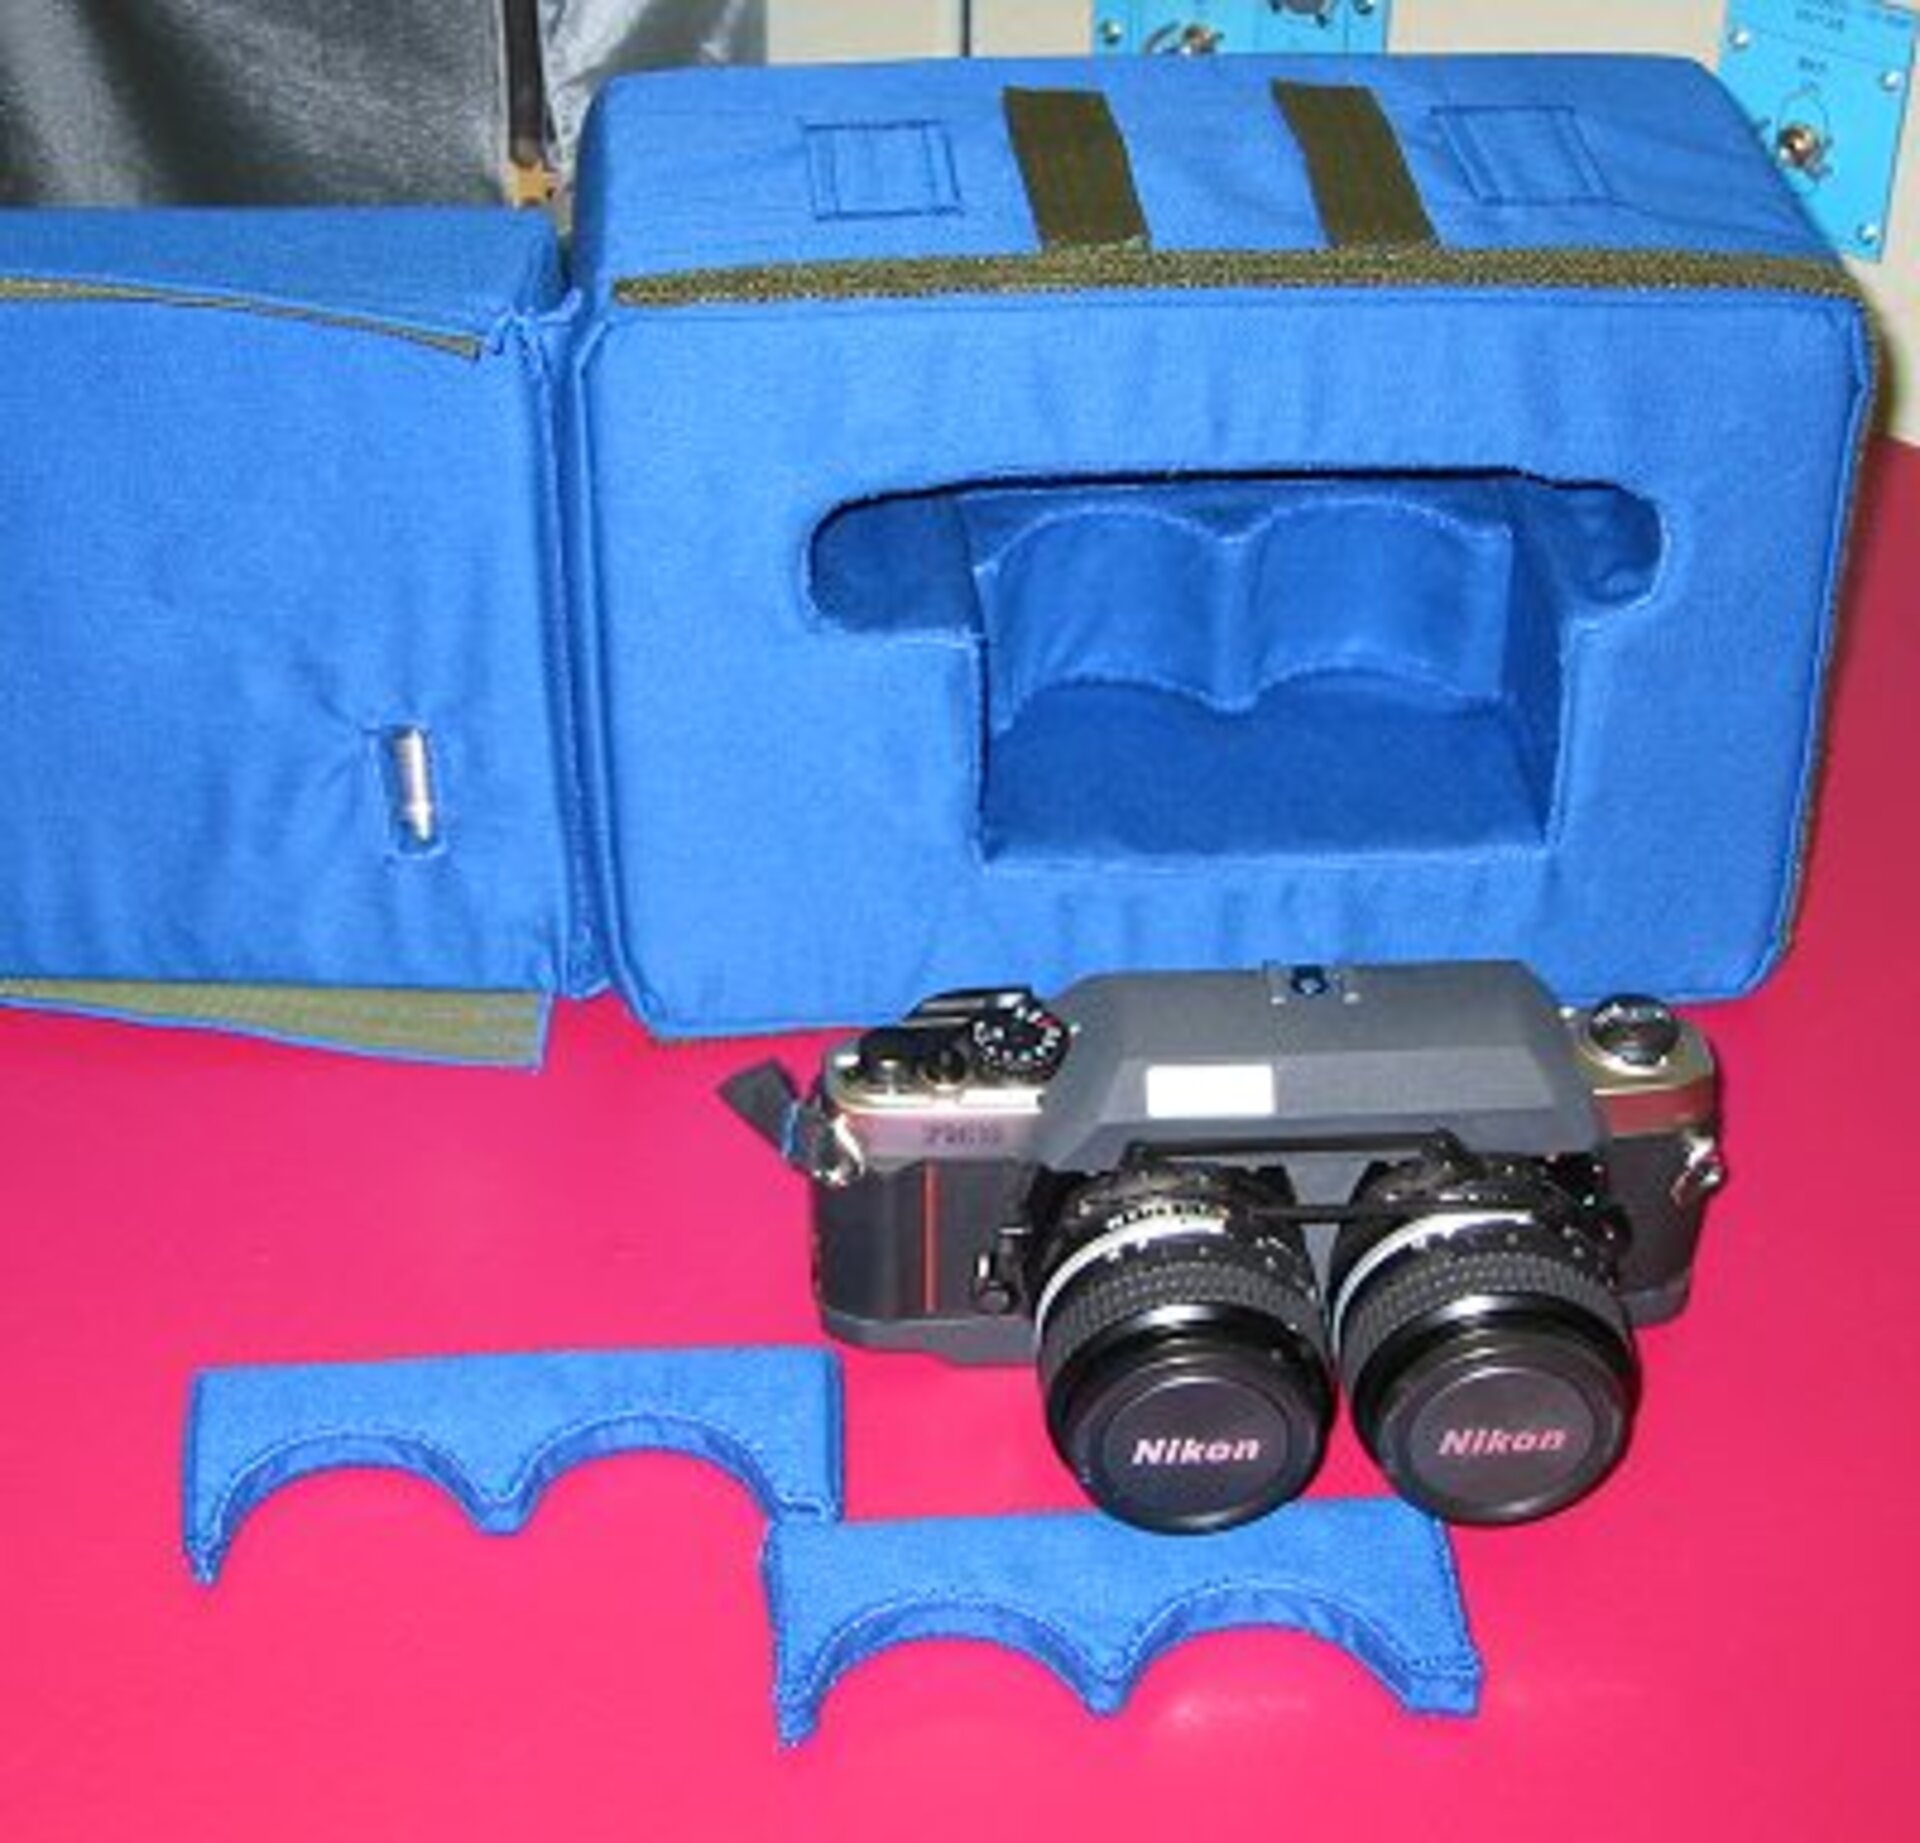 3D camera with its launch container